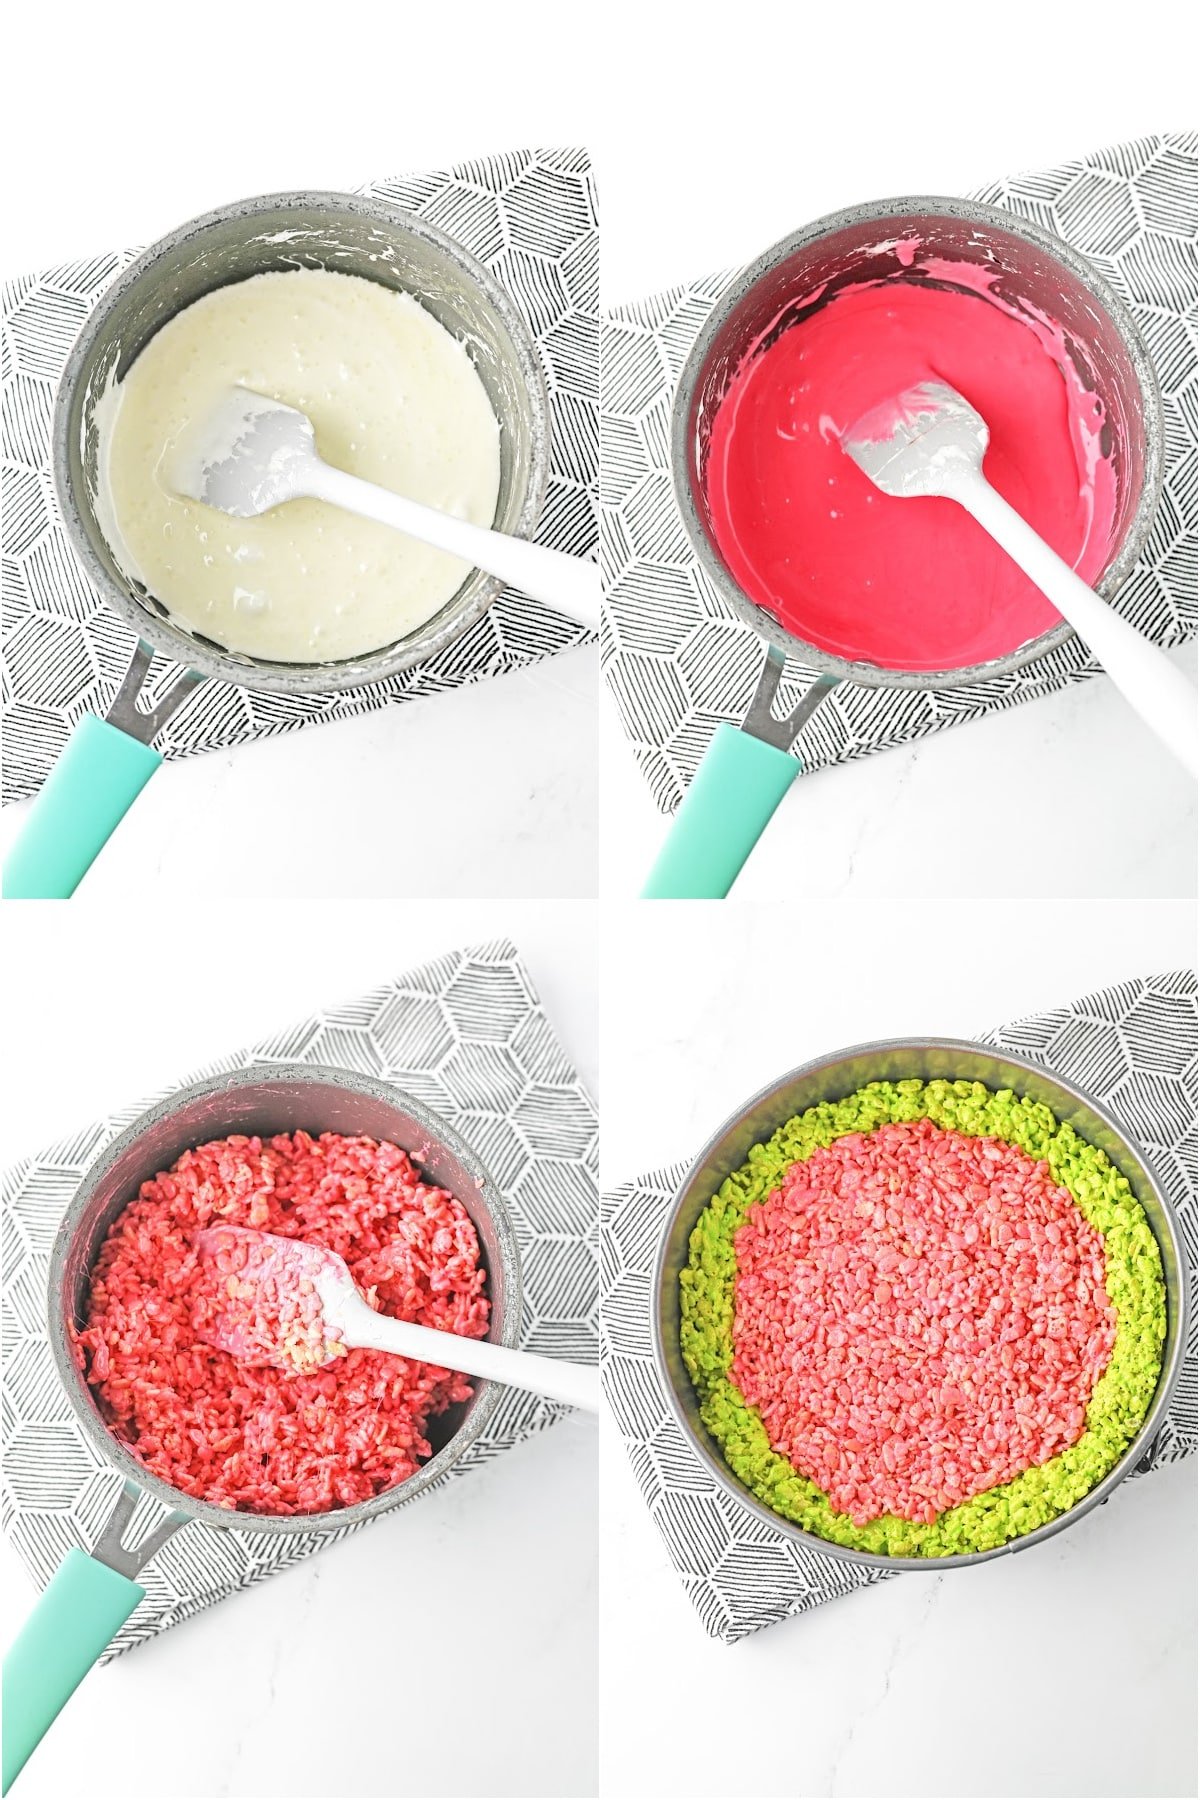 melt marshmallows with red coloring for inside of pan